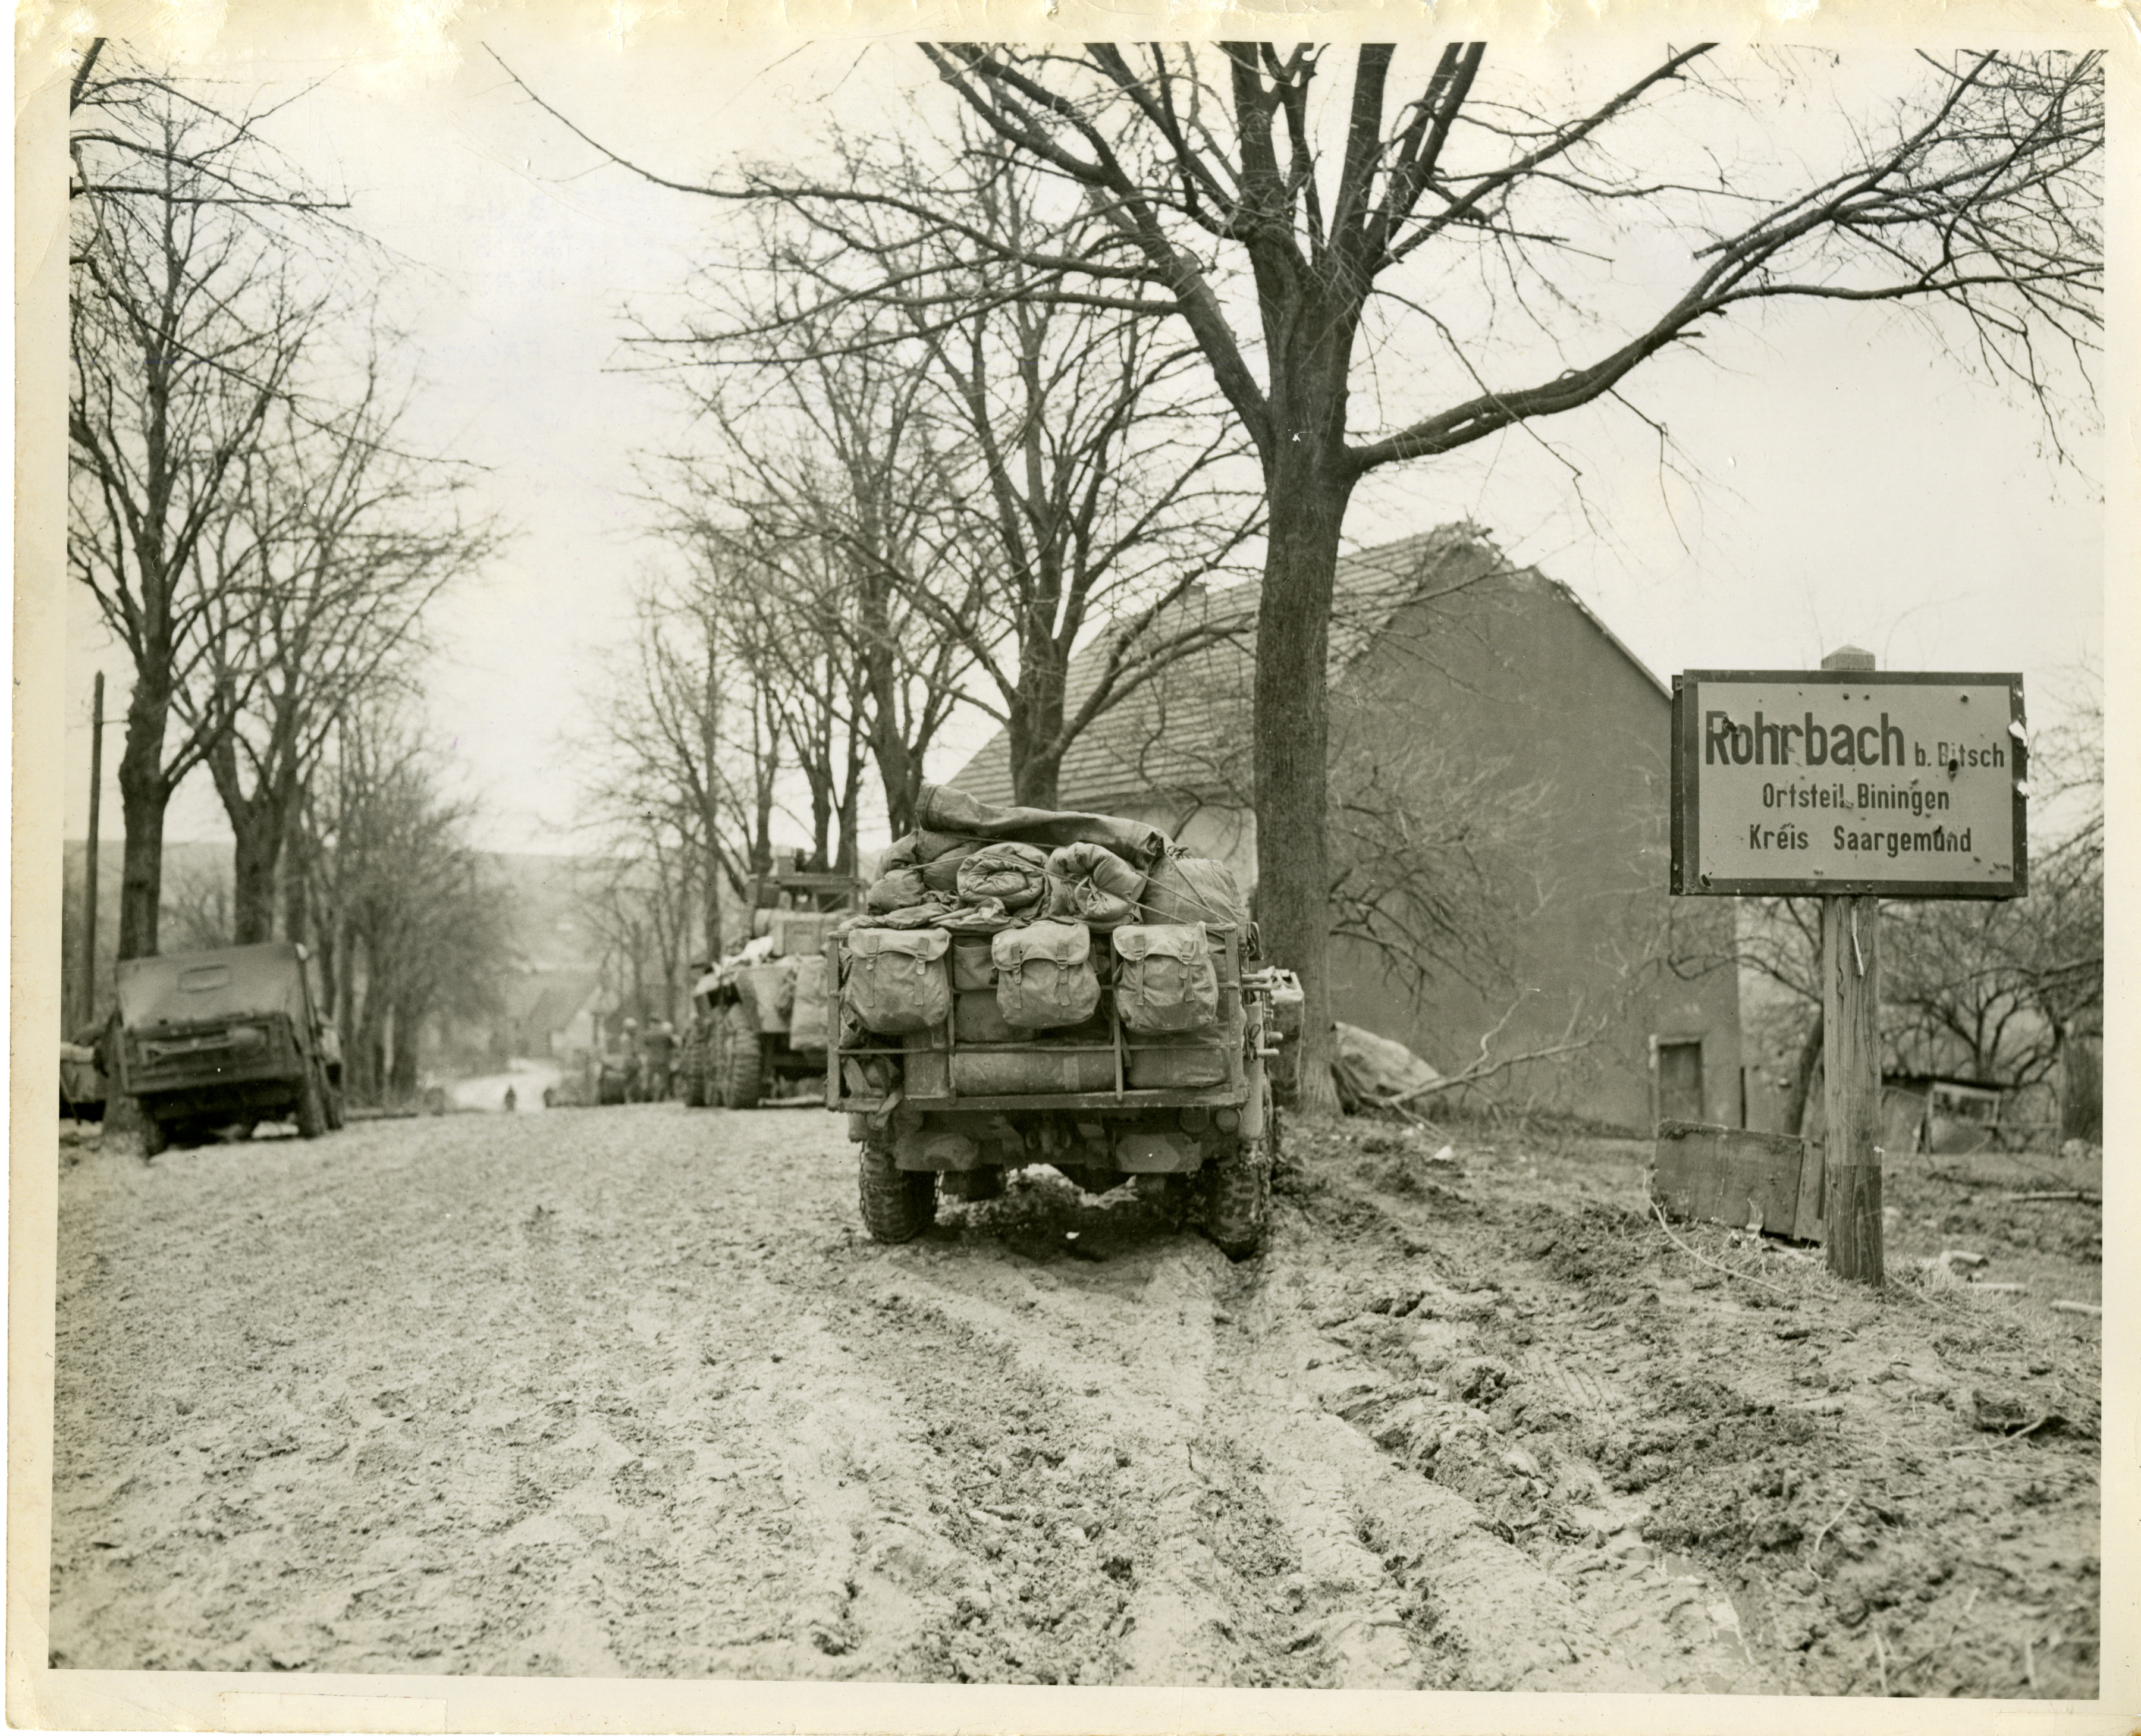 Military vehicles parked alongside a road in Rohrbach, France on 10  December 1944 | The Digital Collections of the National WWII Museum : Oral  Histories